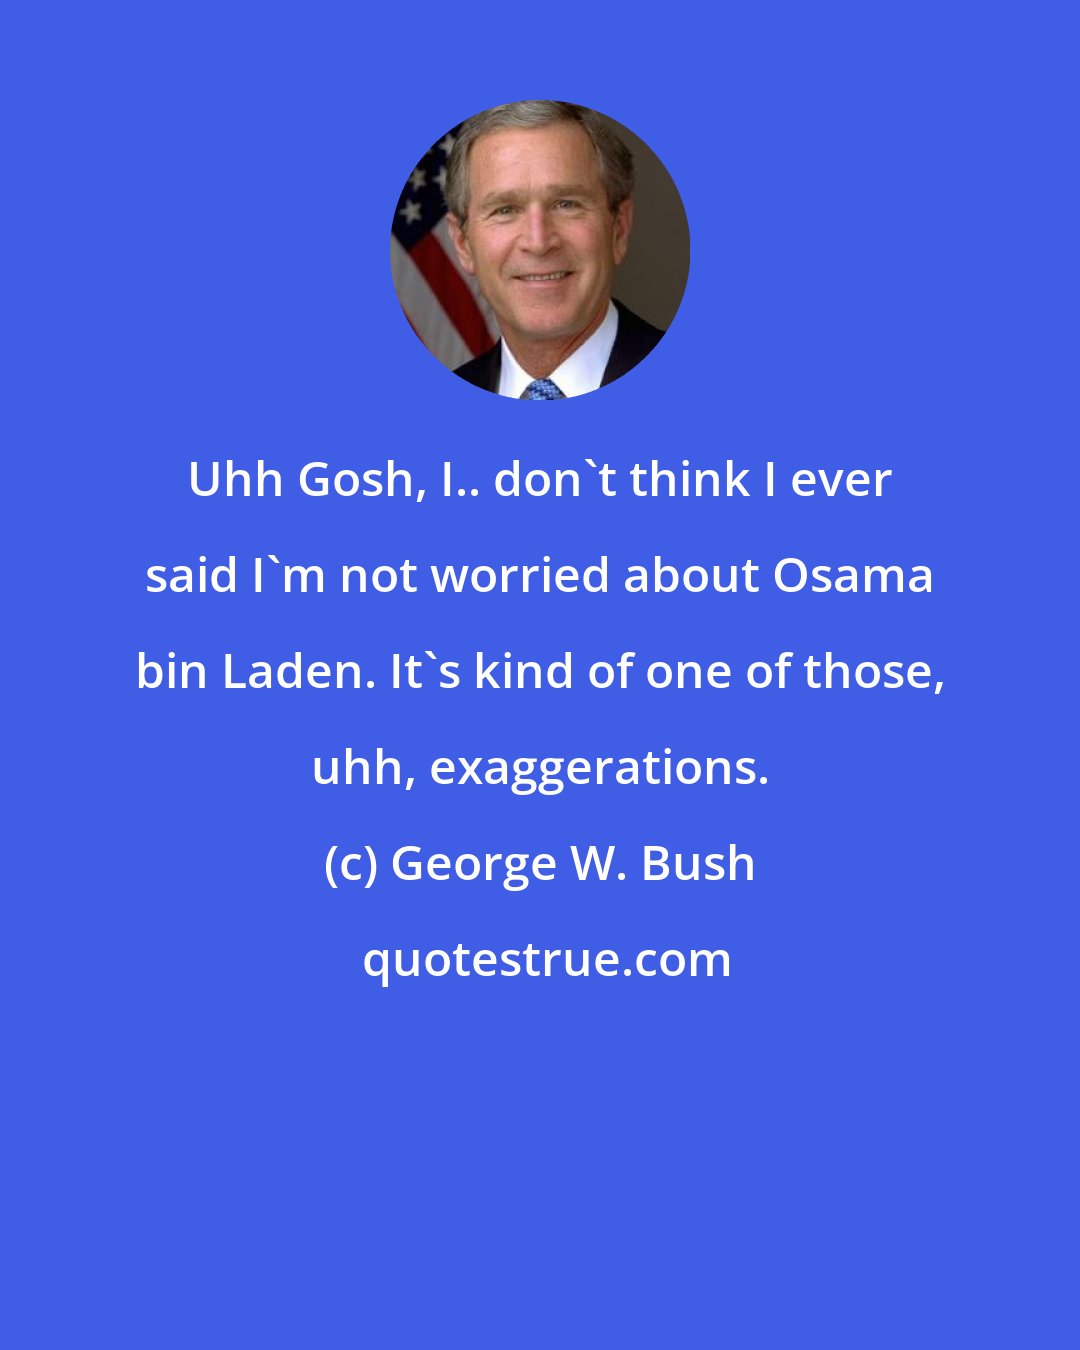 George W. Bush: Uhh Gosh, I.. don't think I ever said I'm not worried about Osama bin Laden. It's kind of one of those, uhh, exaggerations.